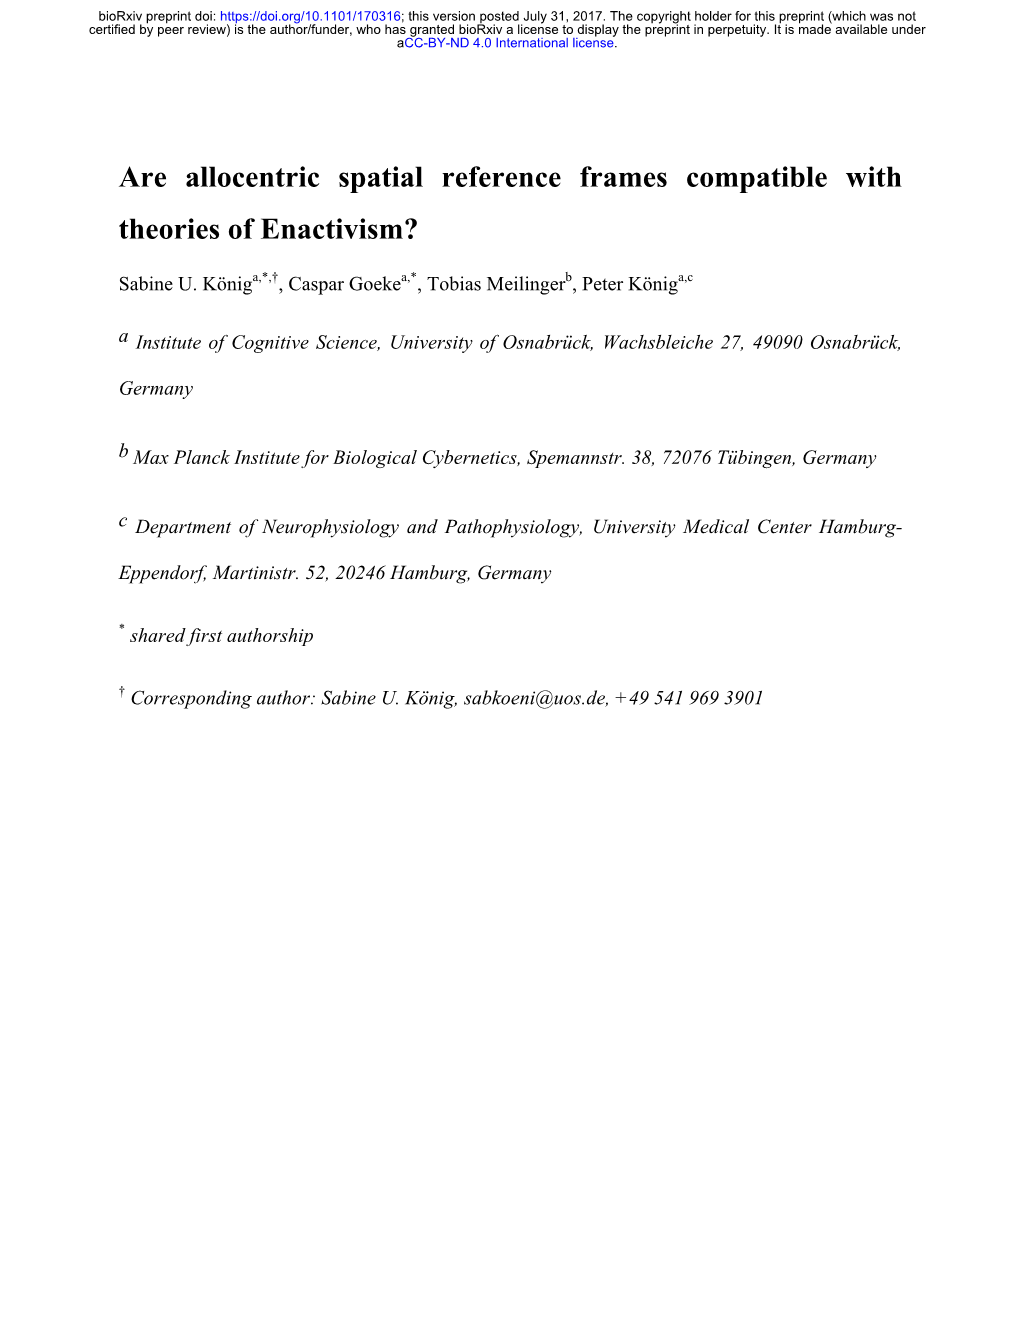 Are Allocentric Spatial Reference Frames Compatible with Theories of Enactivism?